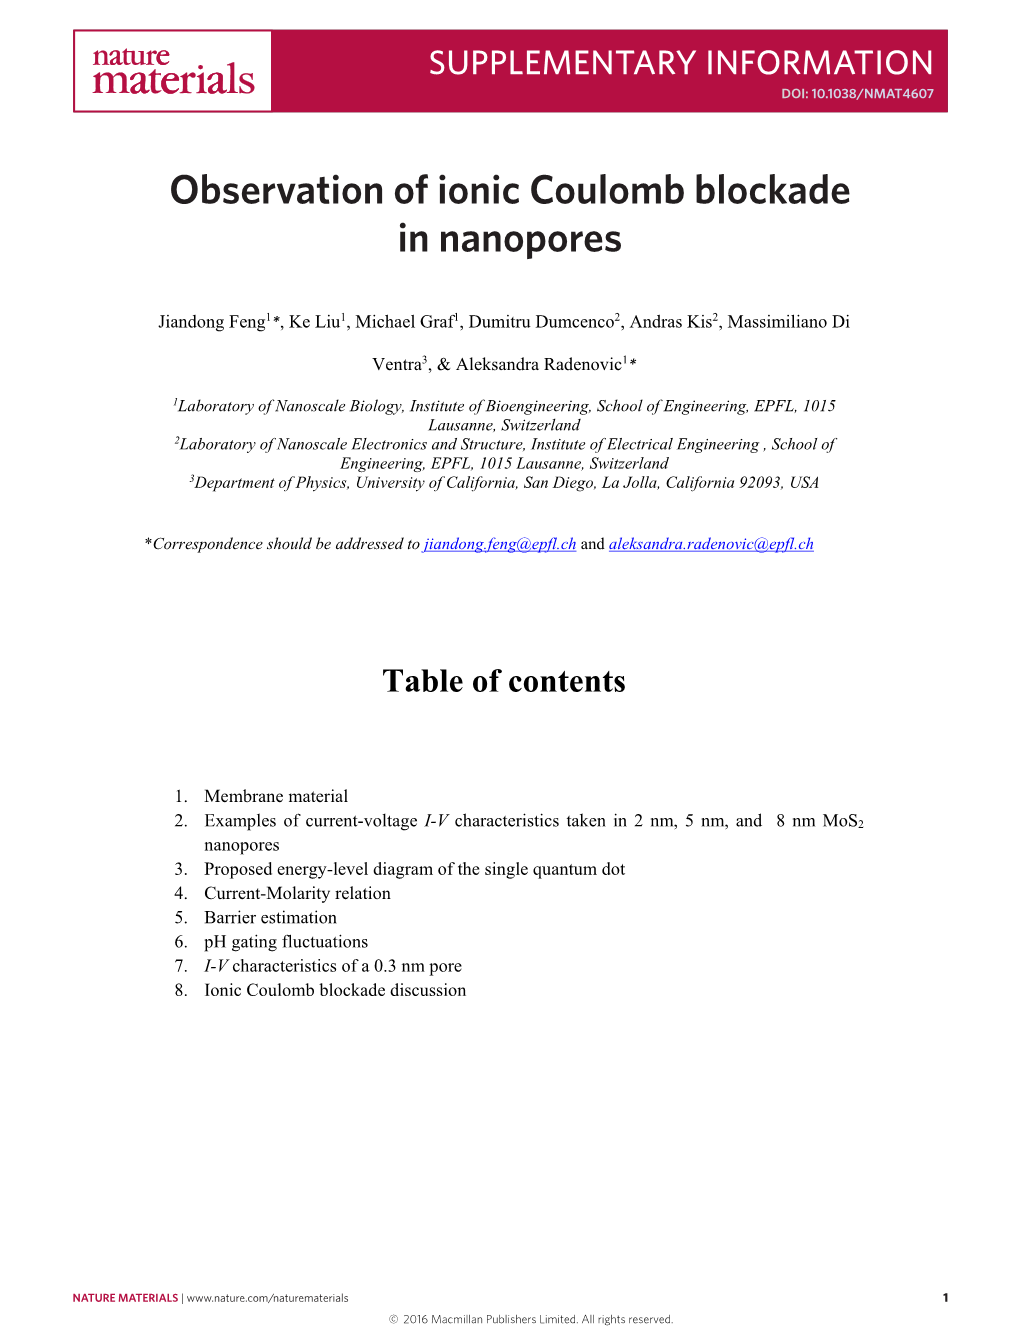 Observation of Ionic Coulomb Blockade in Nanopores in Nanopores